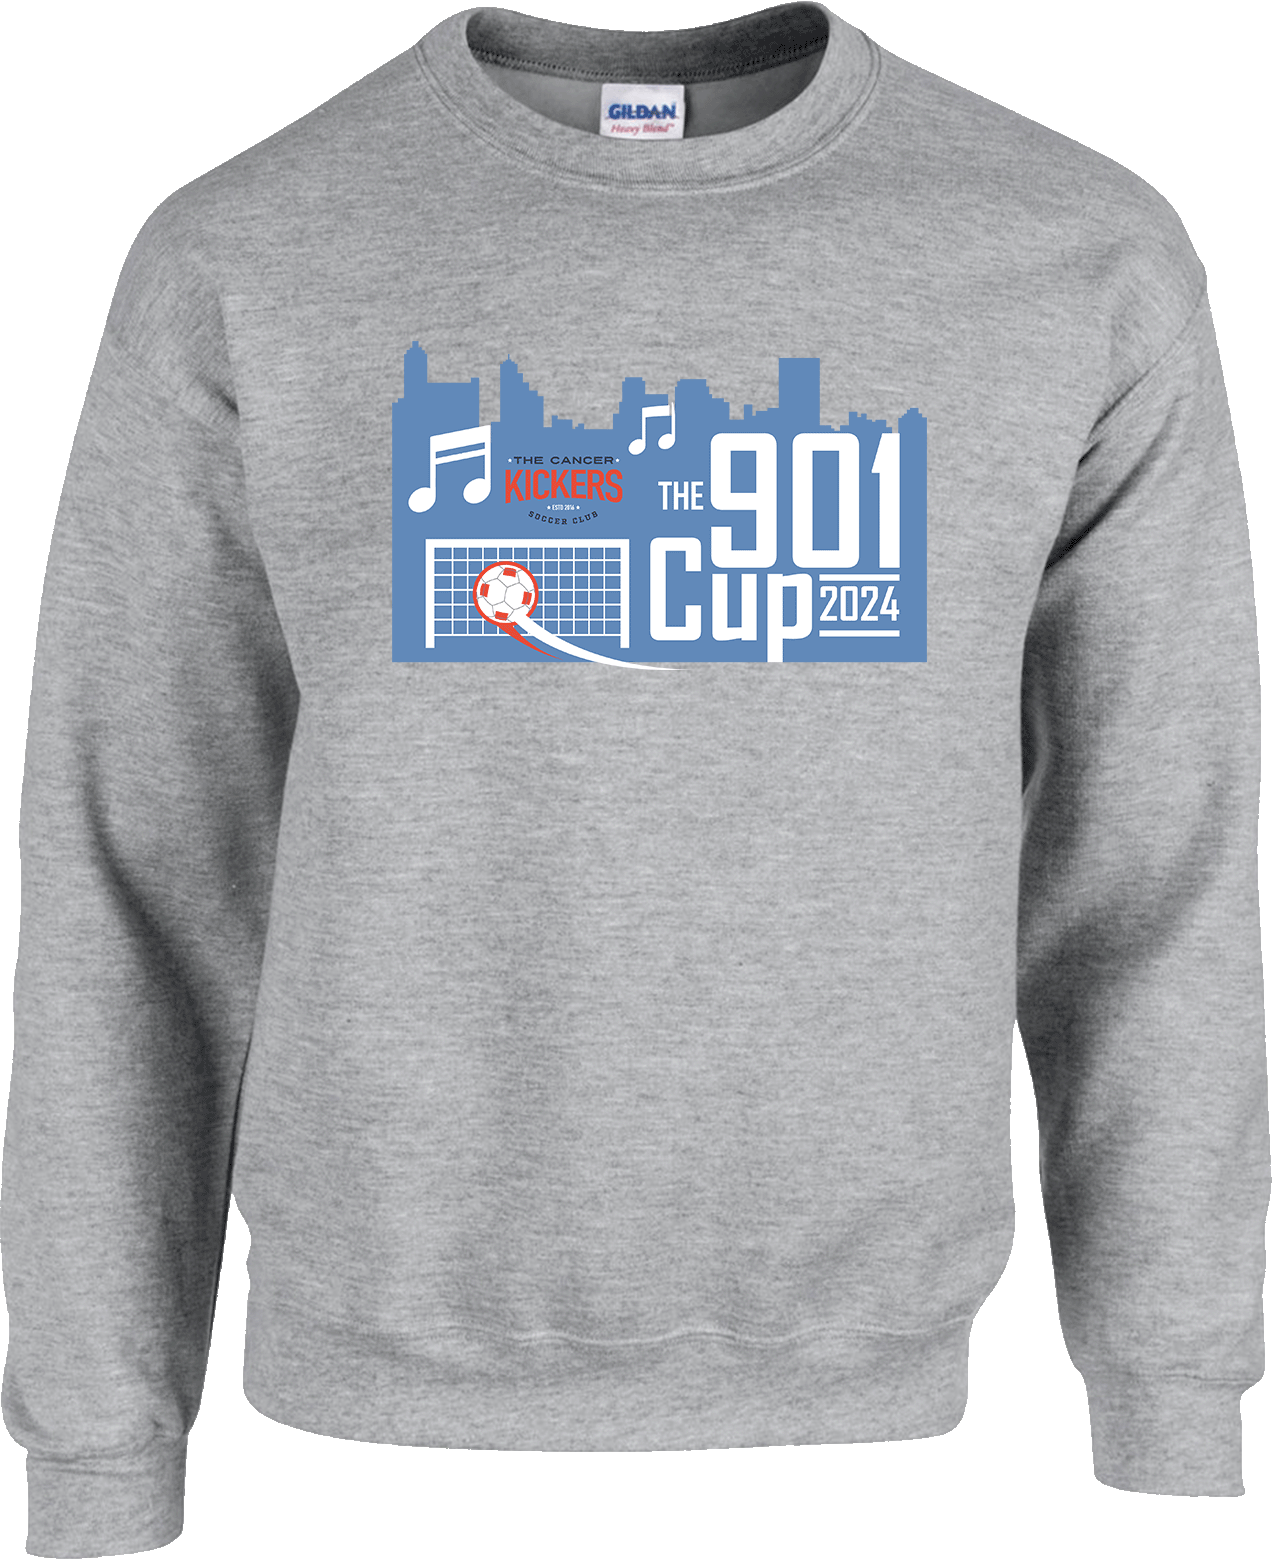 Crew Sweatershirt - 2024 The 901 Cup